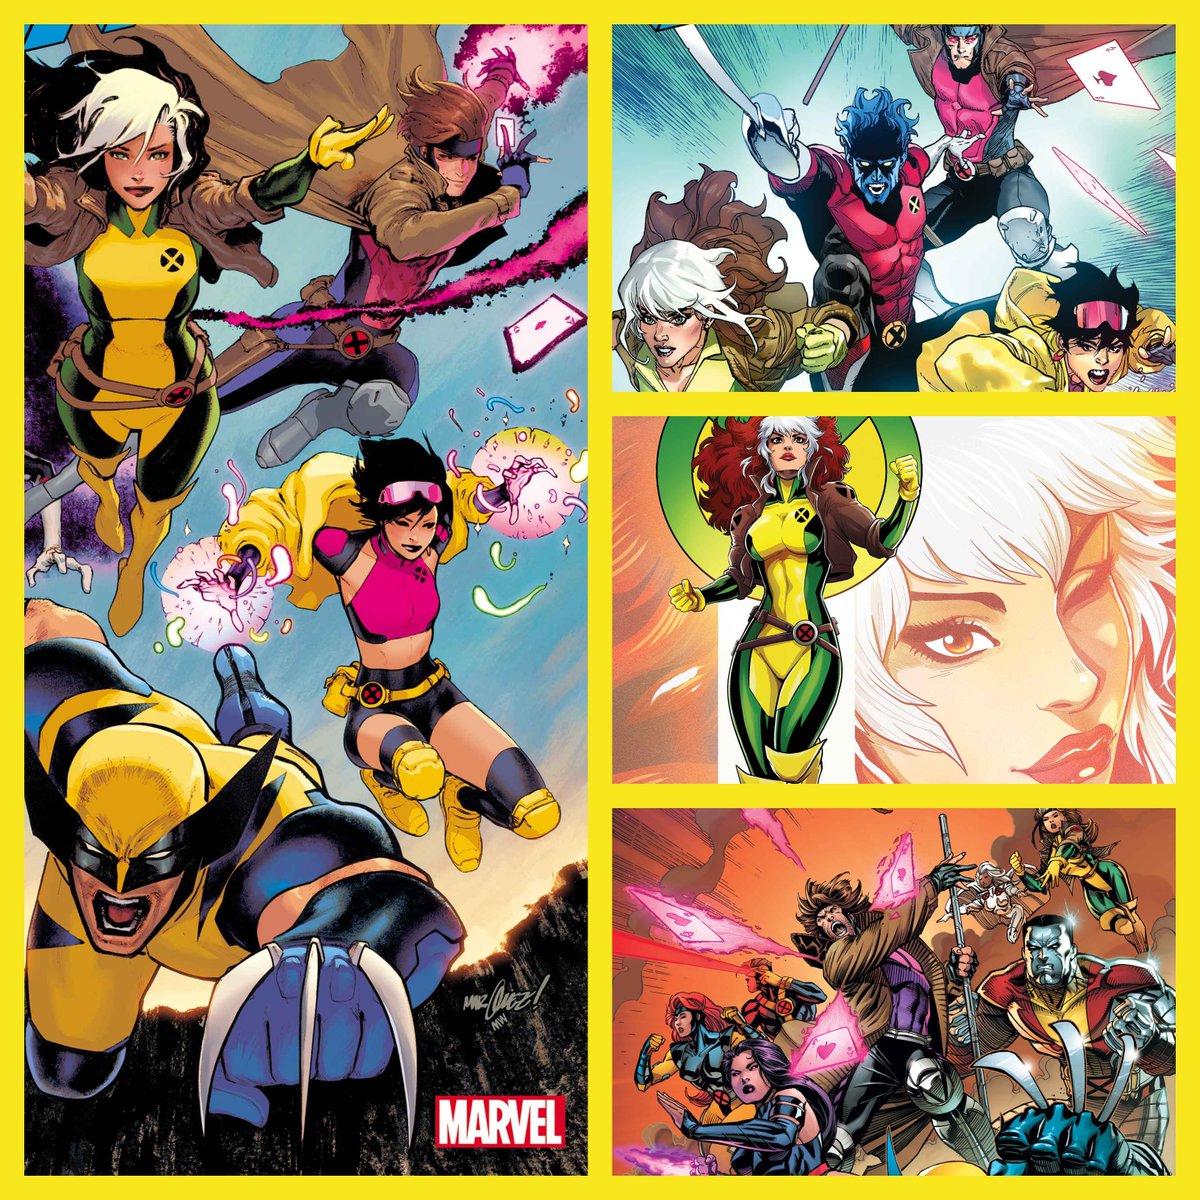 'Uncanny X-Men' #1 variant covers give new looks at Wolverine, Gambit and more!
@GailSimone #comics #XMen #Marvel #Wolverine 
Covers by @DaveMarquez, @leinilyu, @AdamKubert, and @LucianoVecchio:
aiptcomics.com/2024/04/26/unc…